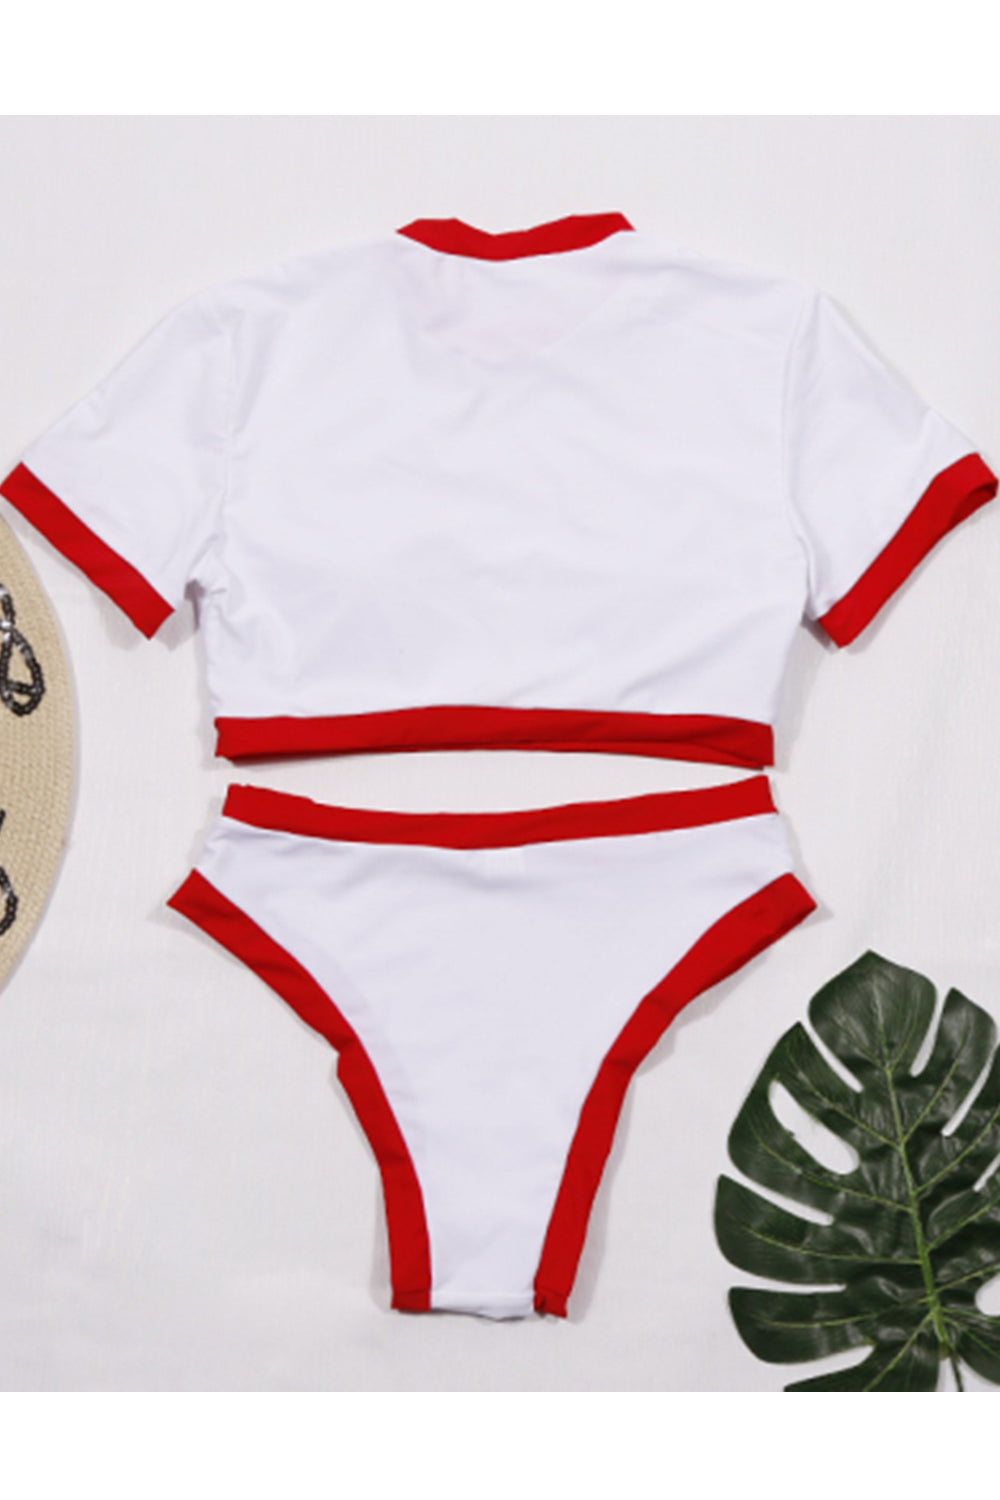 GIRL'S SOLID COLOR TWO PIECE SPORT SWIMSUIT